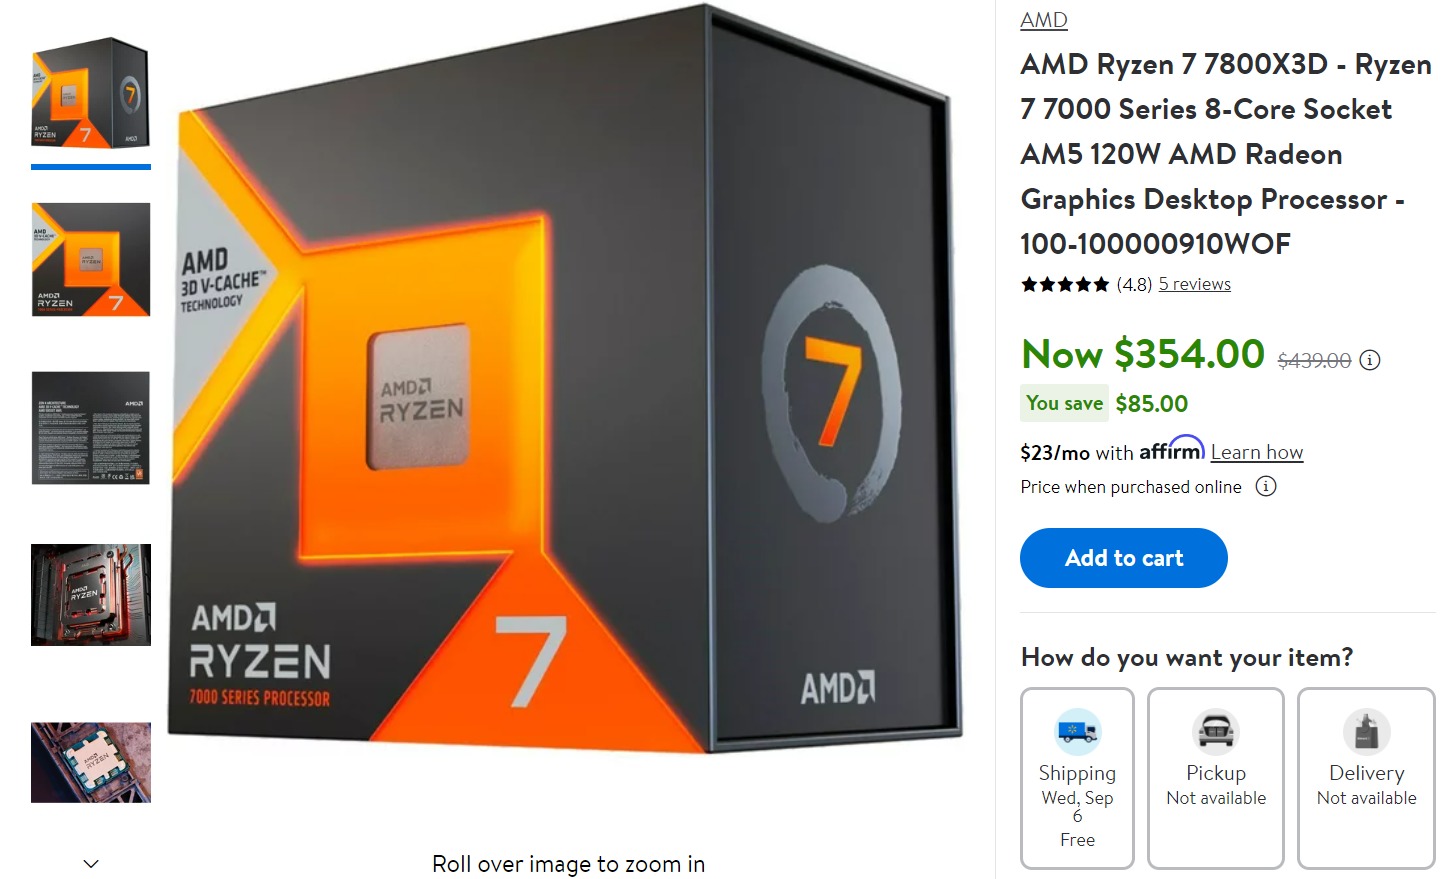 AMD Ryzen 7 7800X3D review: 3D V-Cache for the people